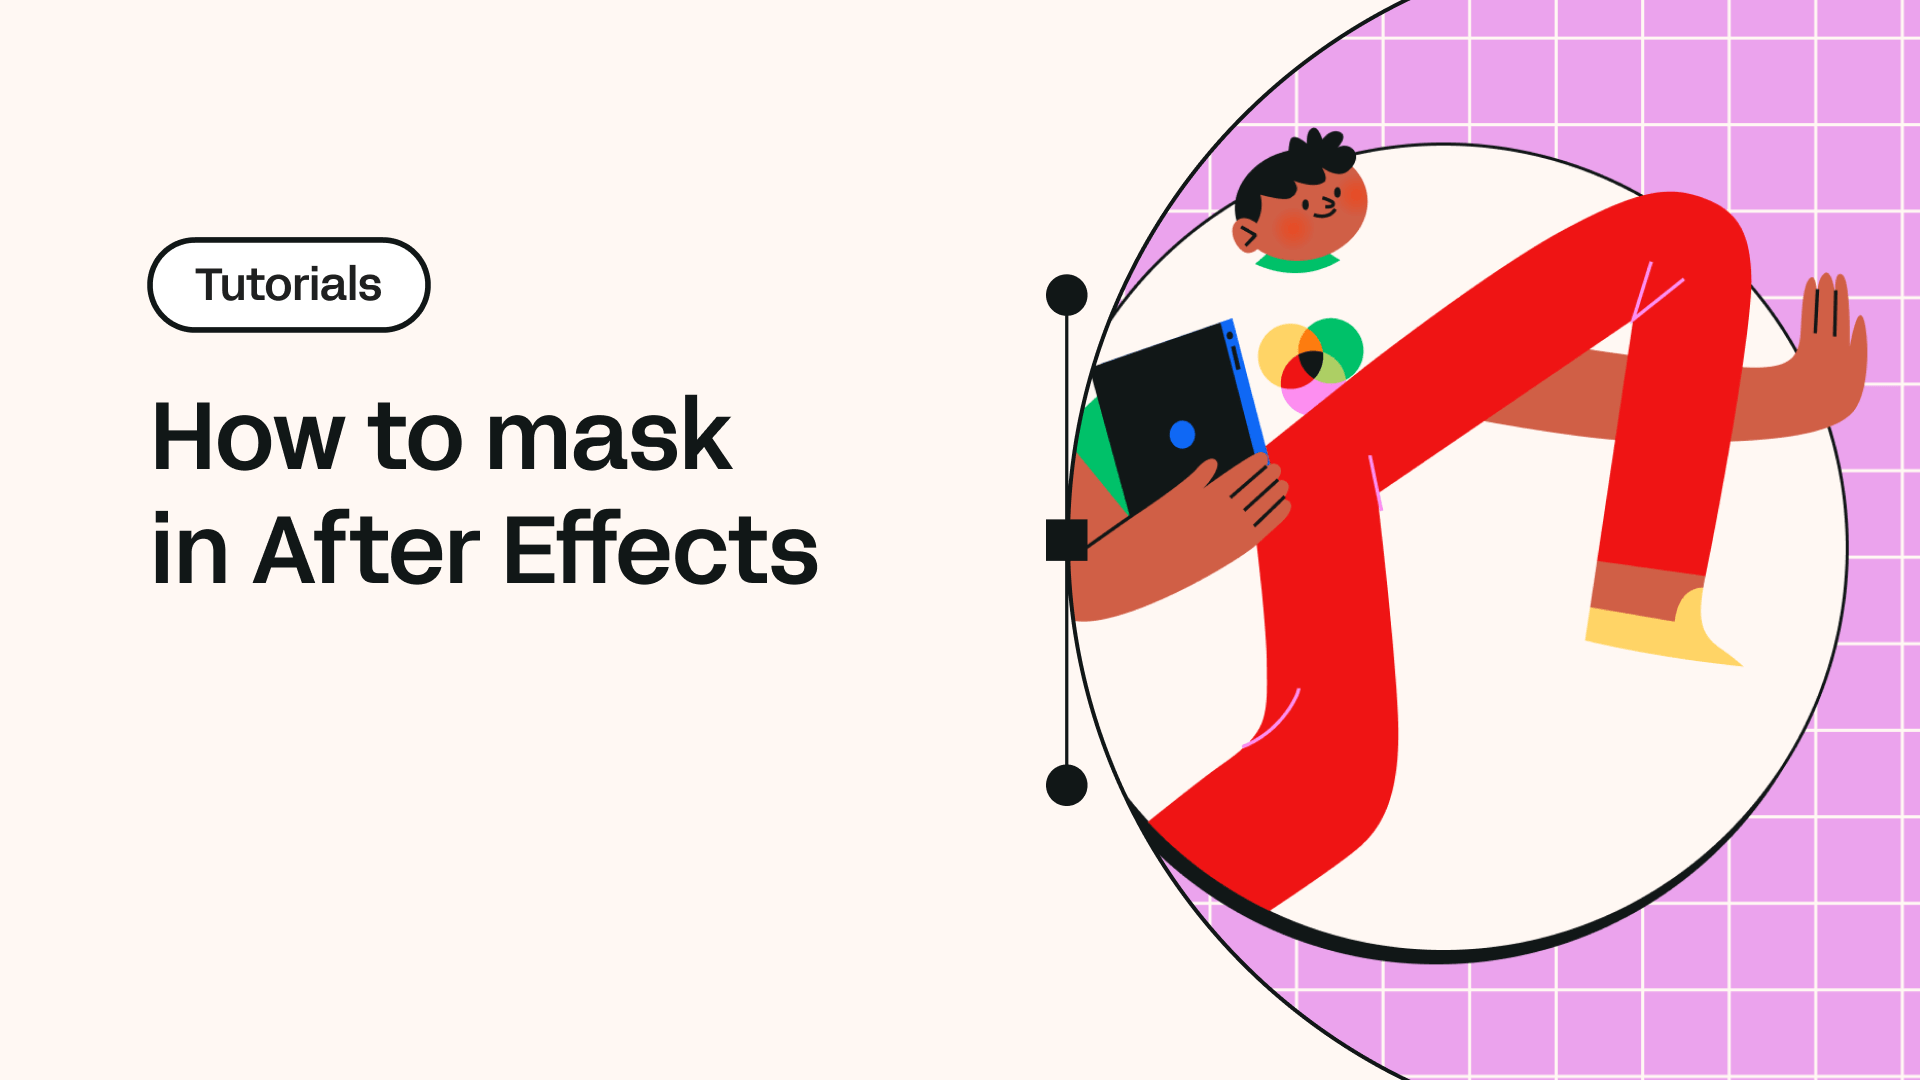 How to mask in After Effects